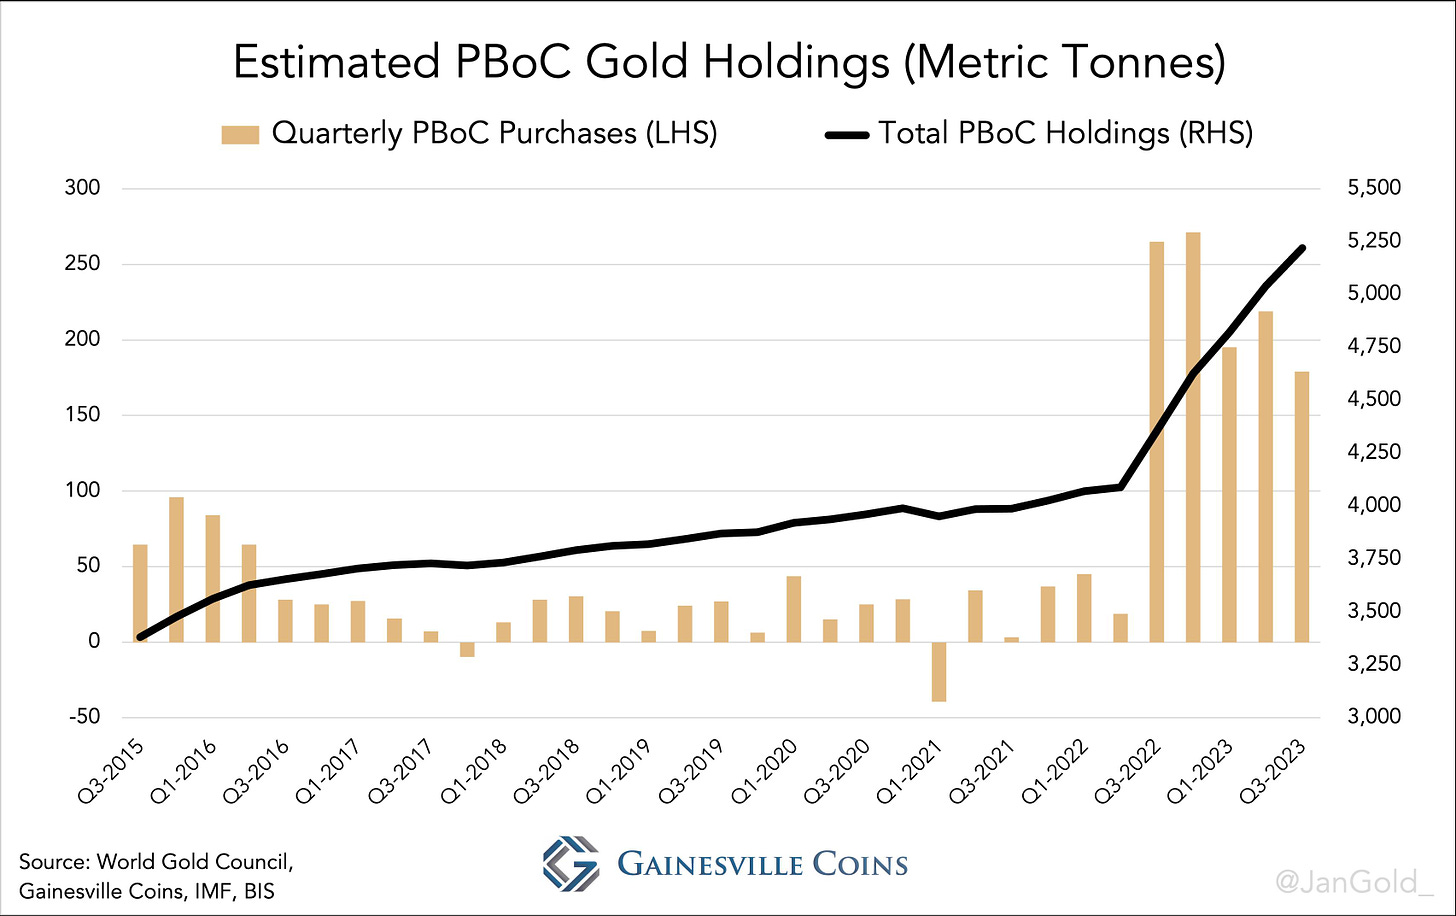 chart showing estimated gold holdings by people's bank of china